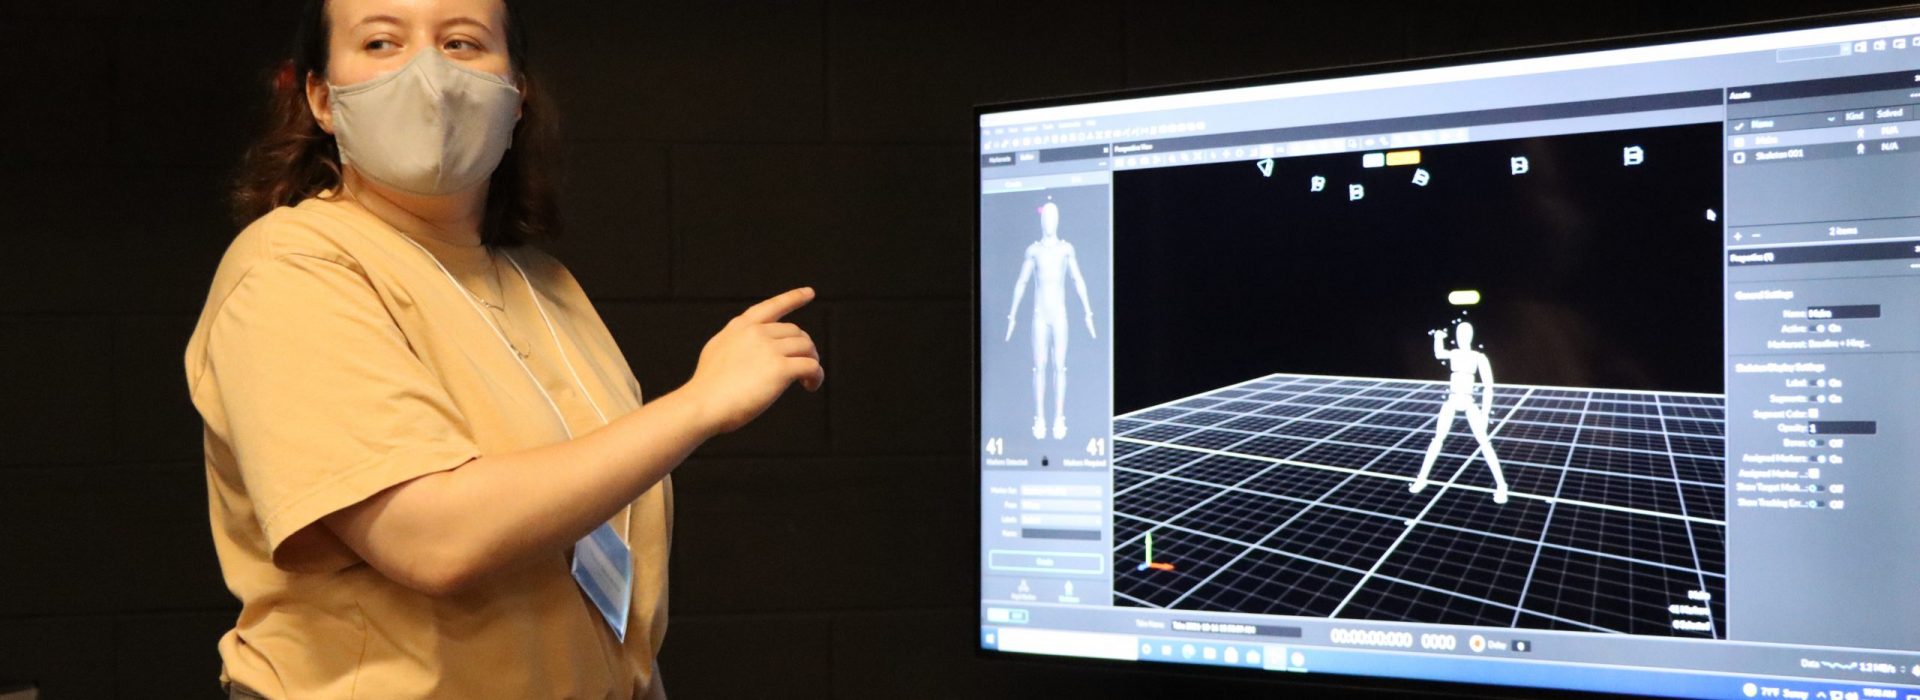 Student pointing at live motion capture